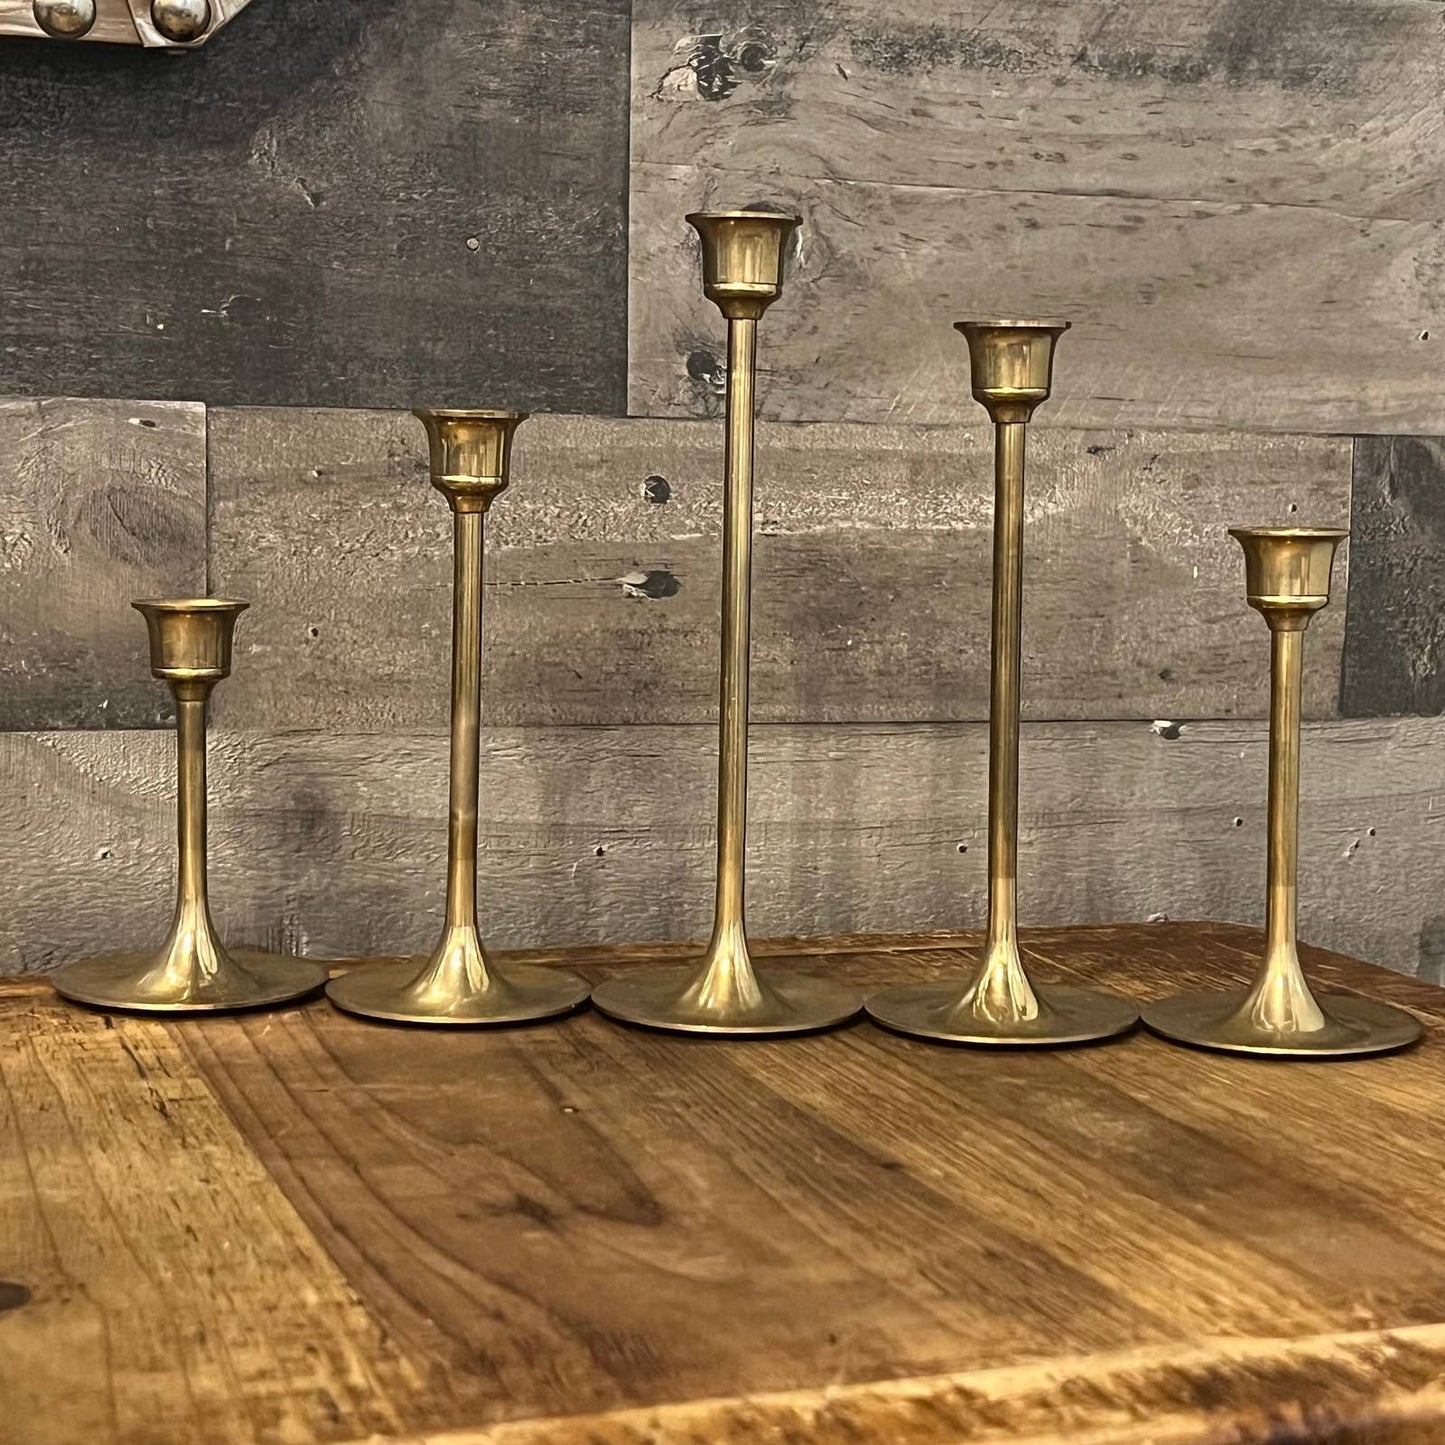 Vintage brass graduated height candlestick holders - 5 candlestick holders